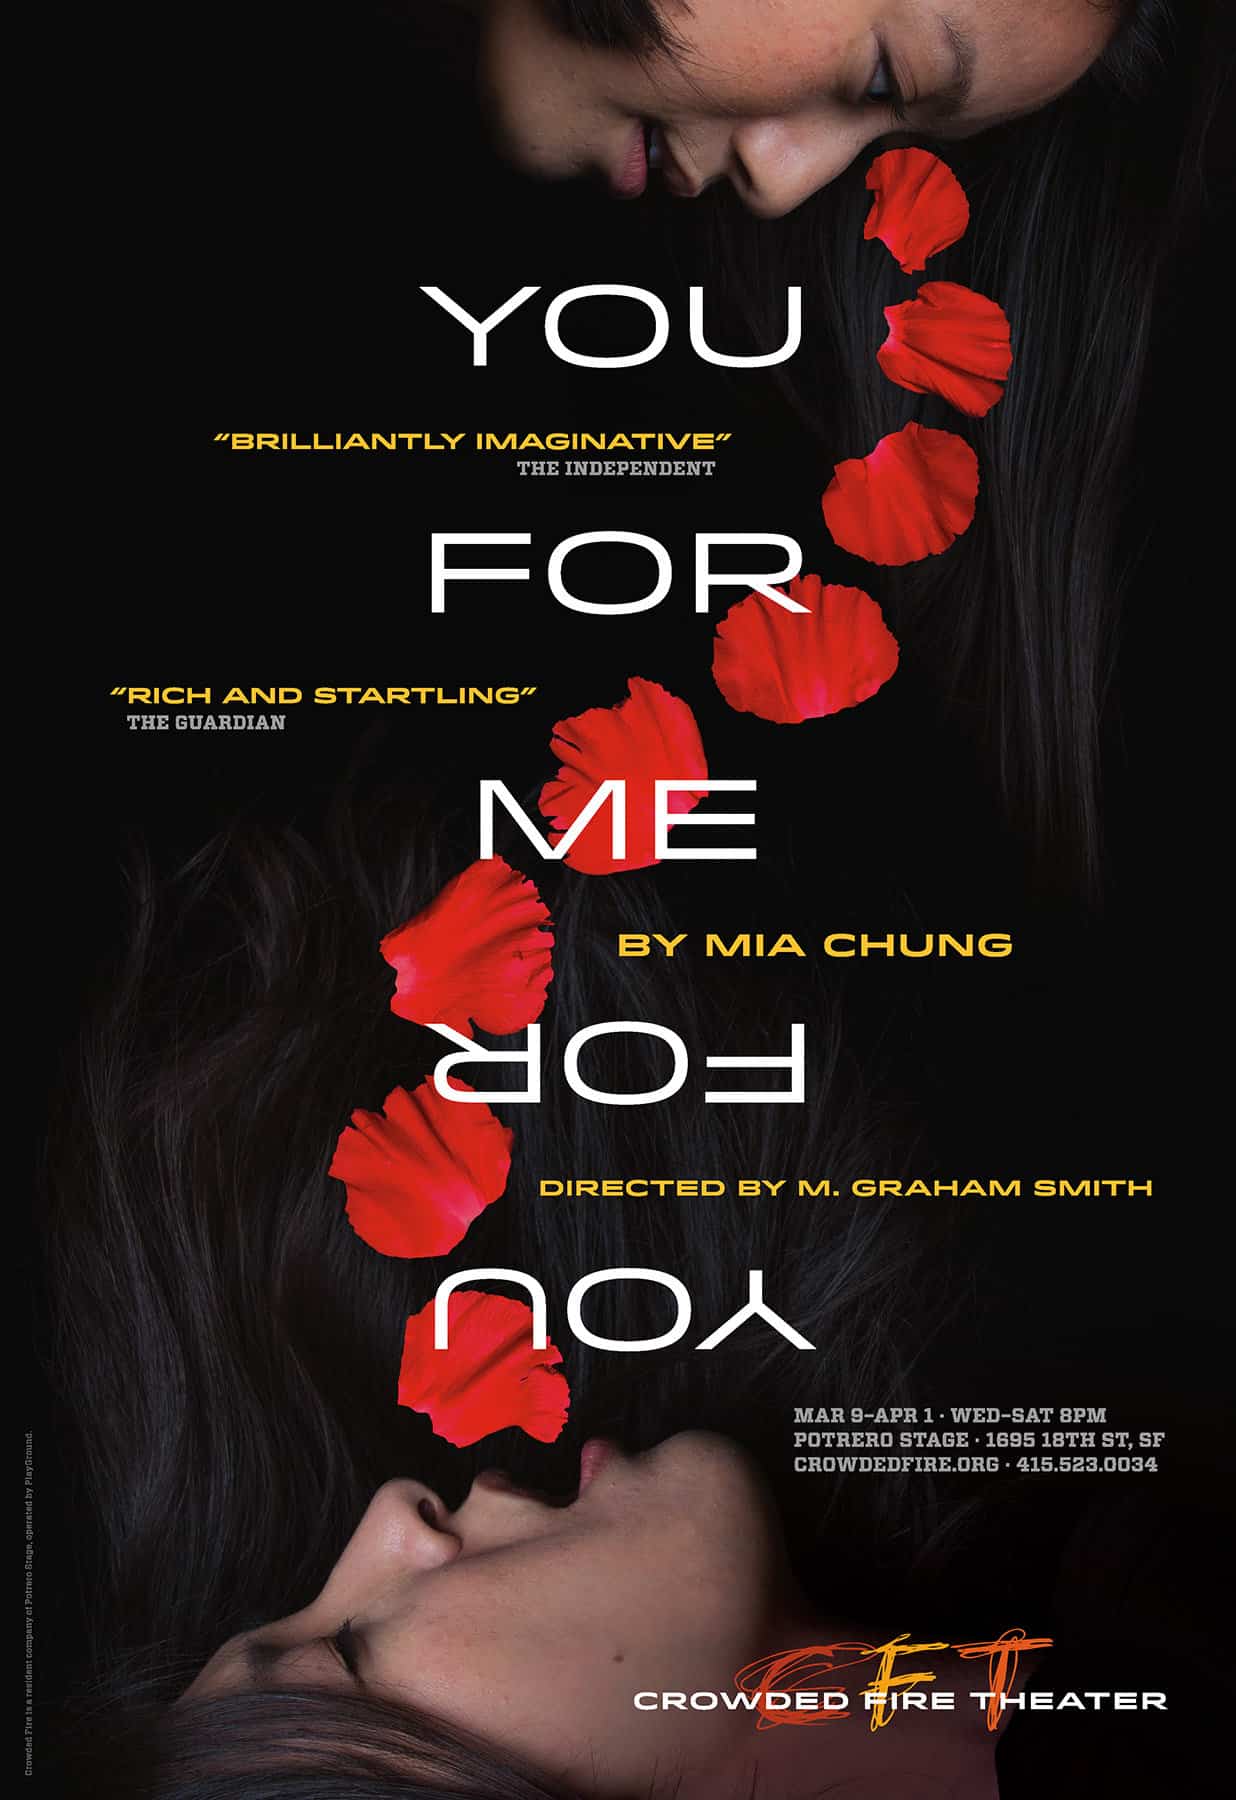 Poster for the play "You for Me for You" at Crowded Fire Theater. The image is of the profile of faces of two women facing each other, one at the top looking down, the other at the bottom looking up. Red carnation petals float down from the eyes of the woman on top into the mouth of the woman at the bottom. The poster is designed such that it could almost be flipped upside down and still be readable, with the title words one to a line, stacked vertically, with the second "for" and "you" upside down.